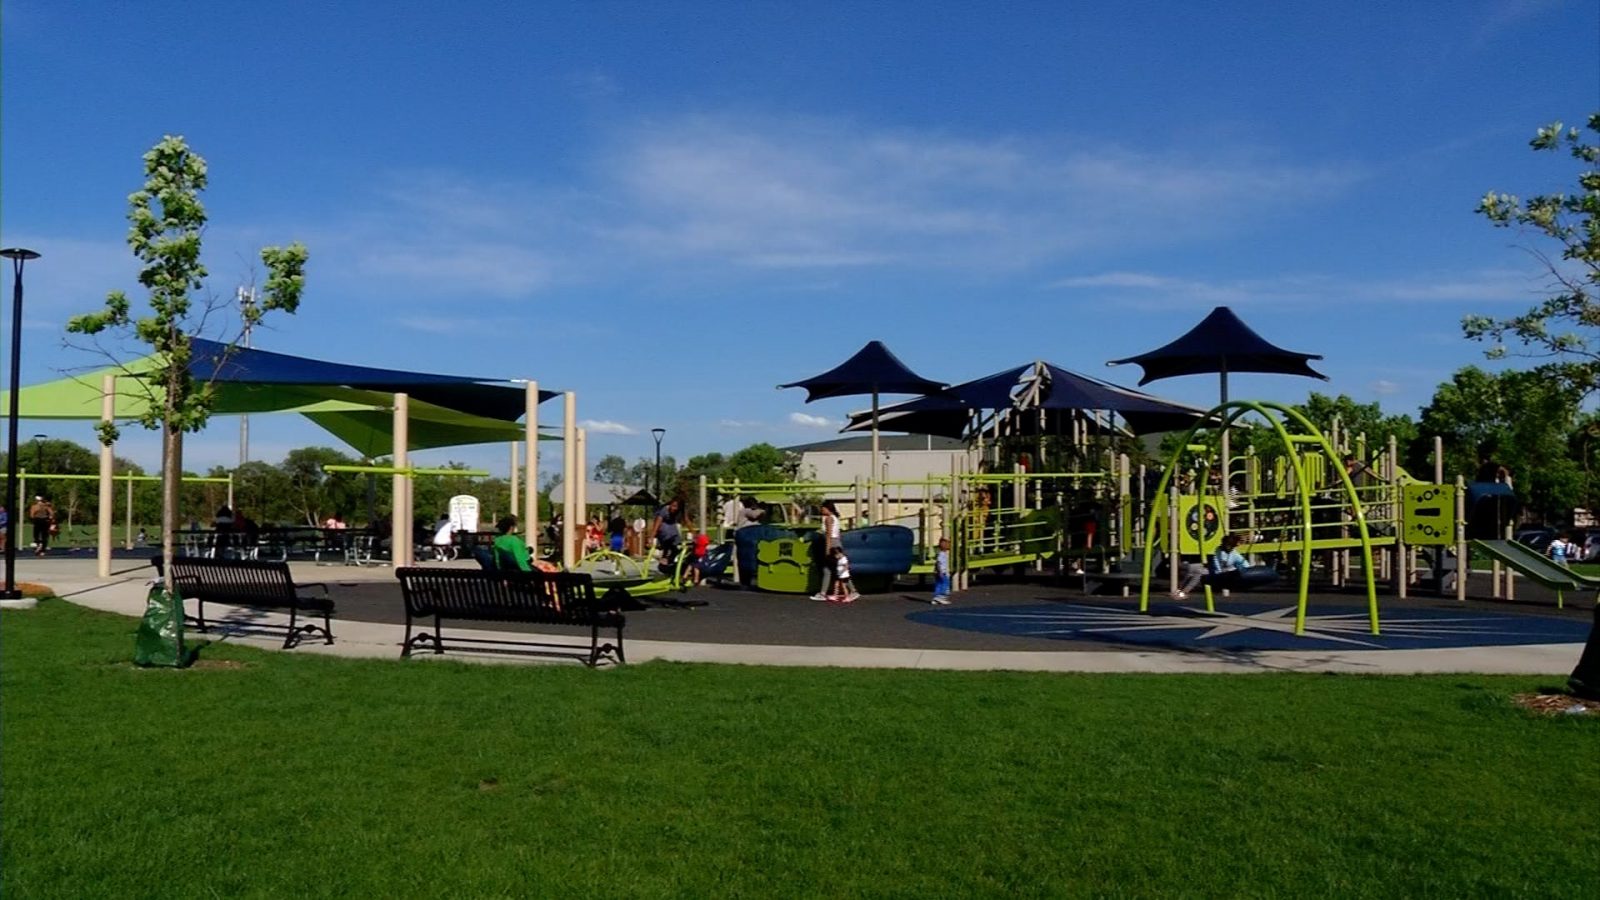 Crystal inclusive play areas